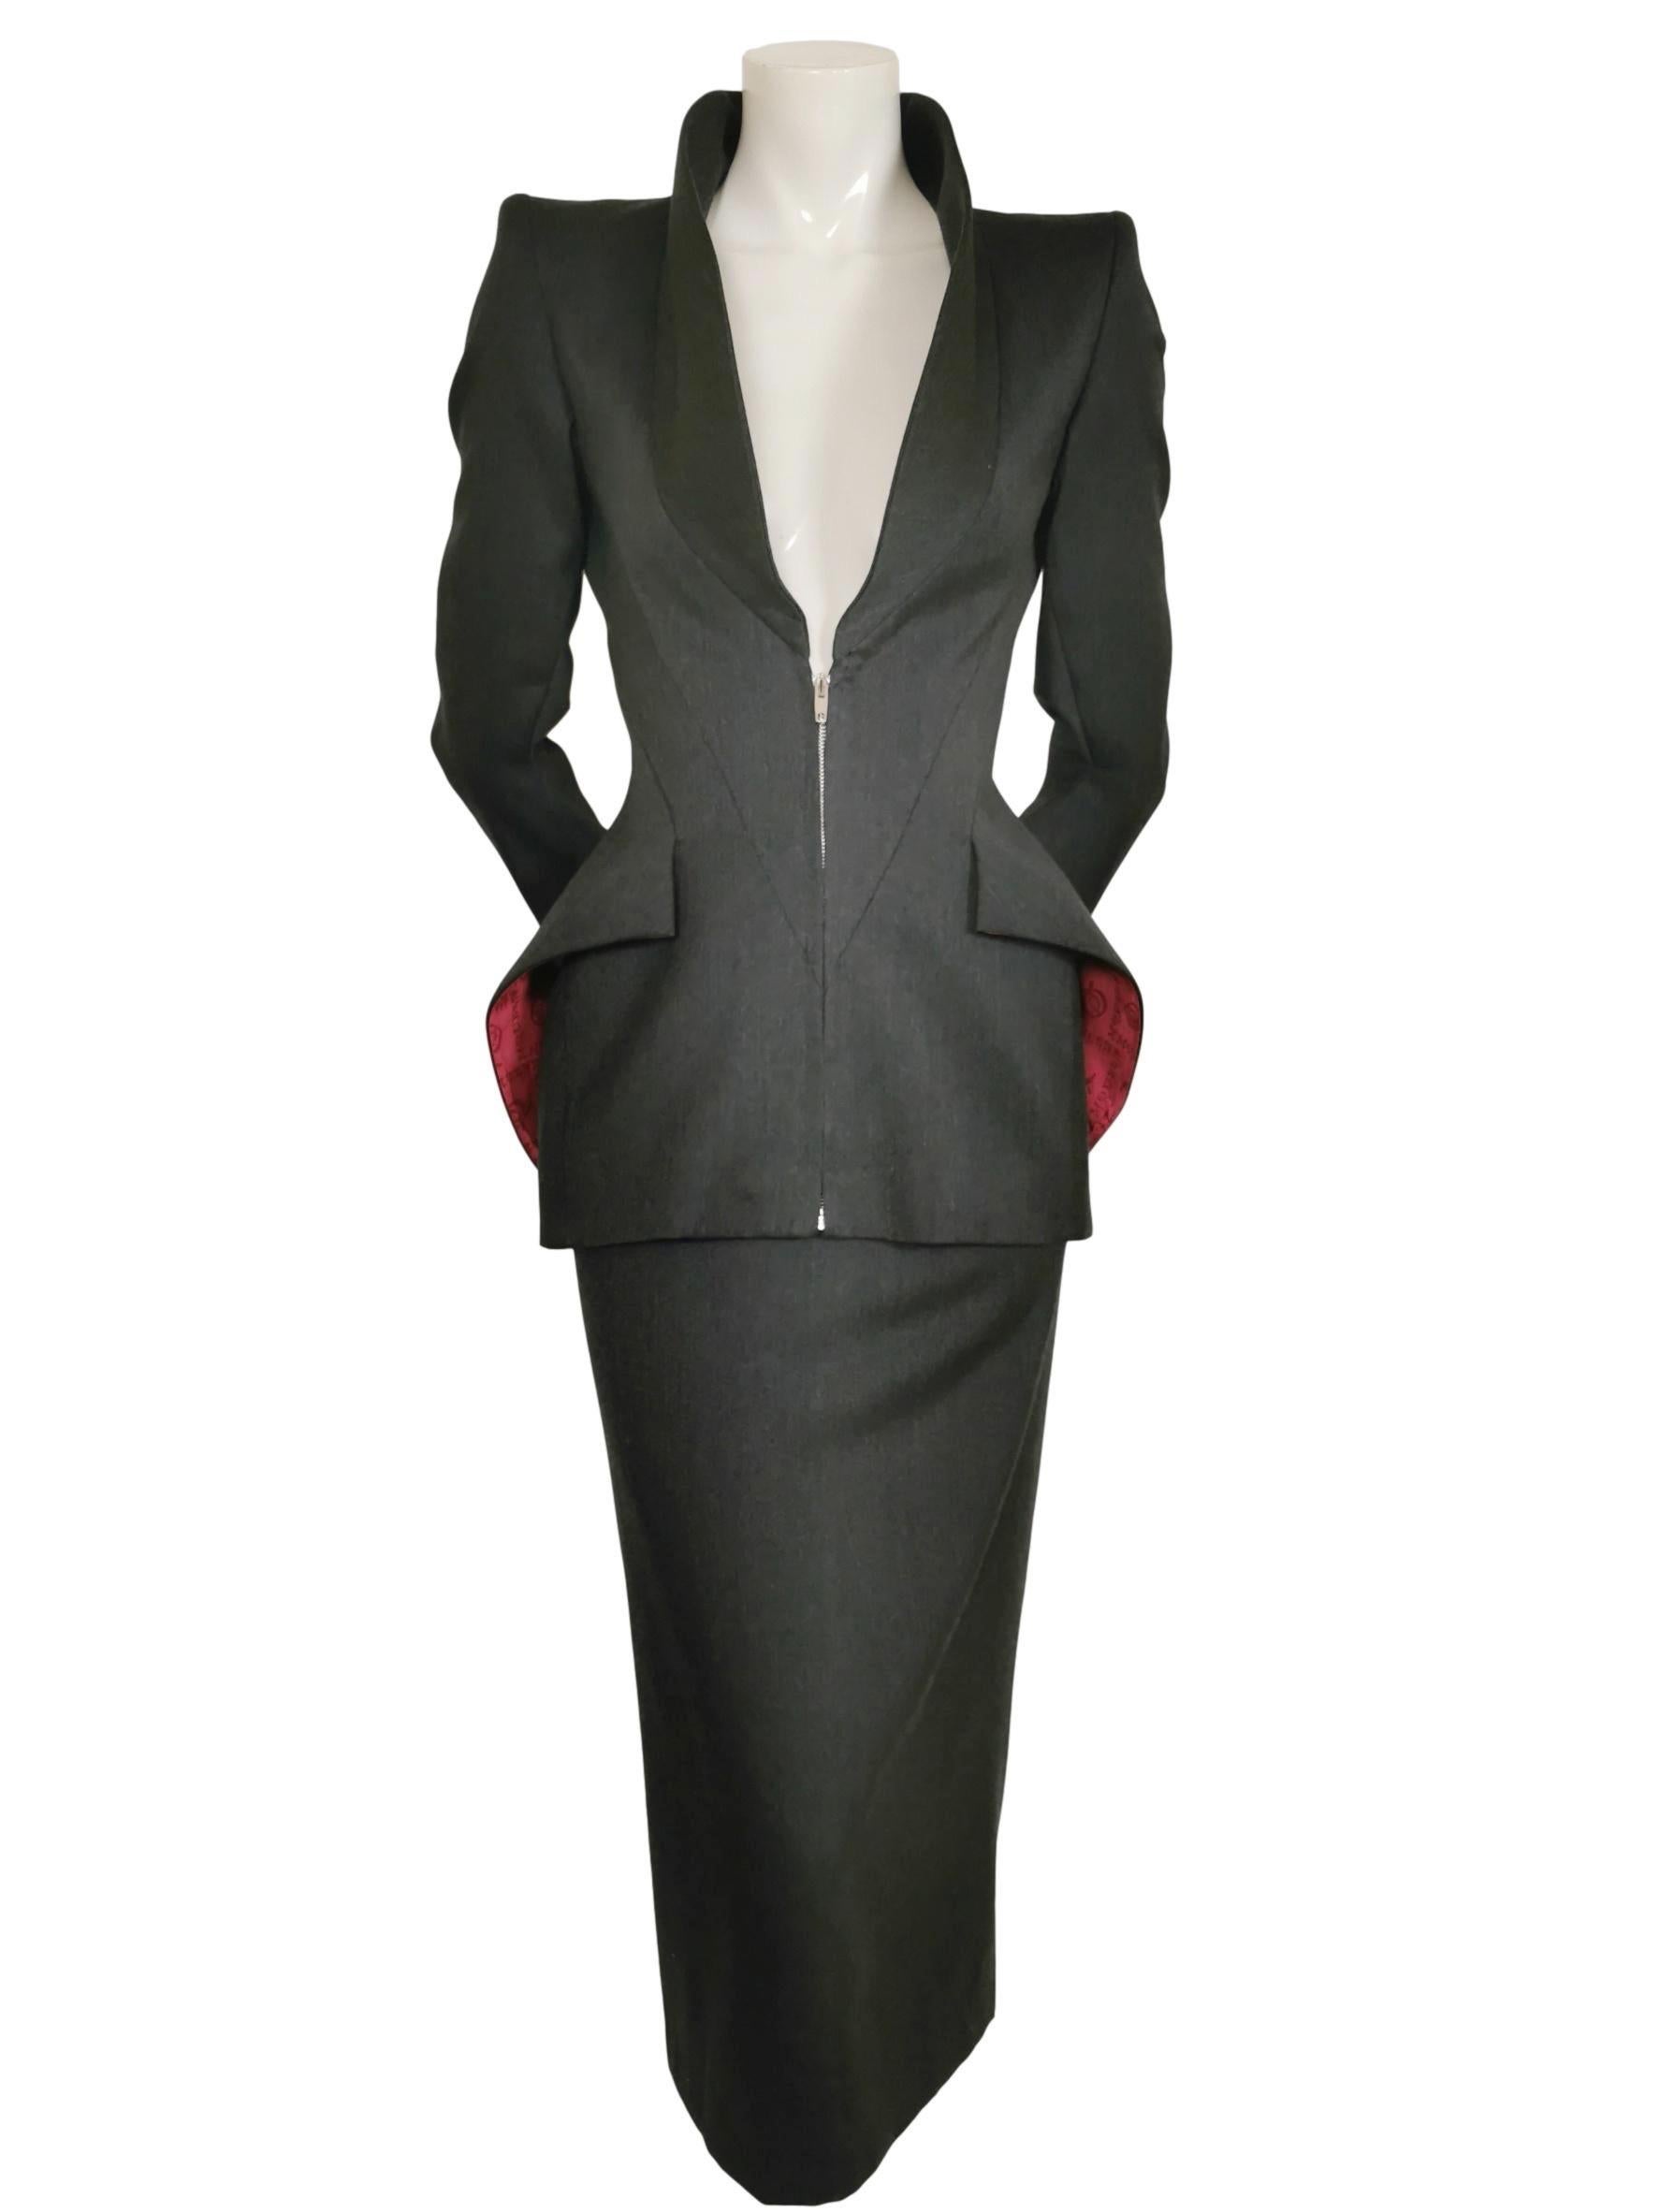 Alexander McQueen 1998 Joan Collection Fitted Skirt Suit 2